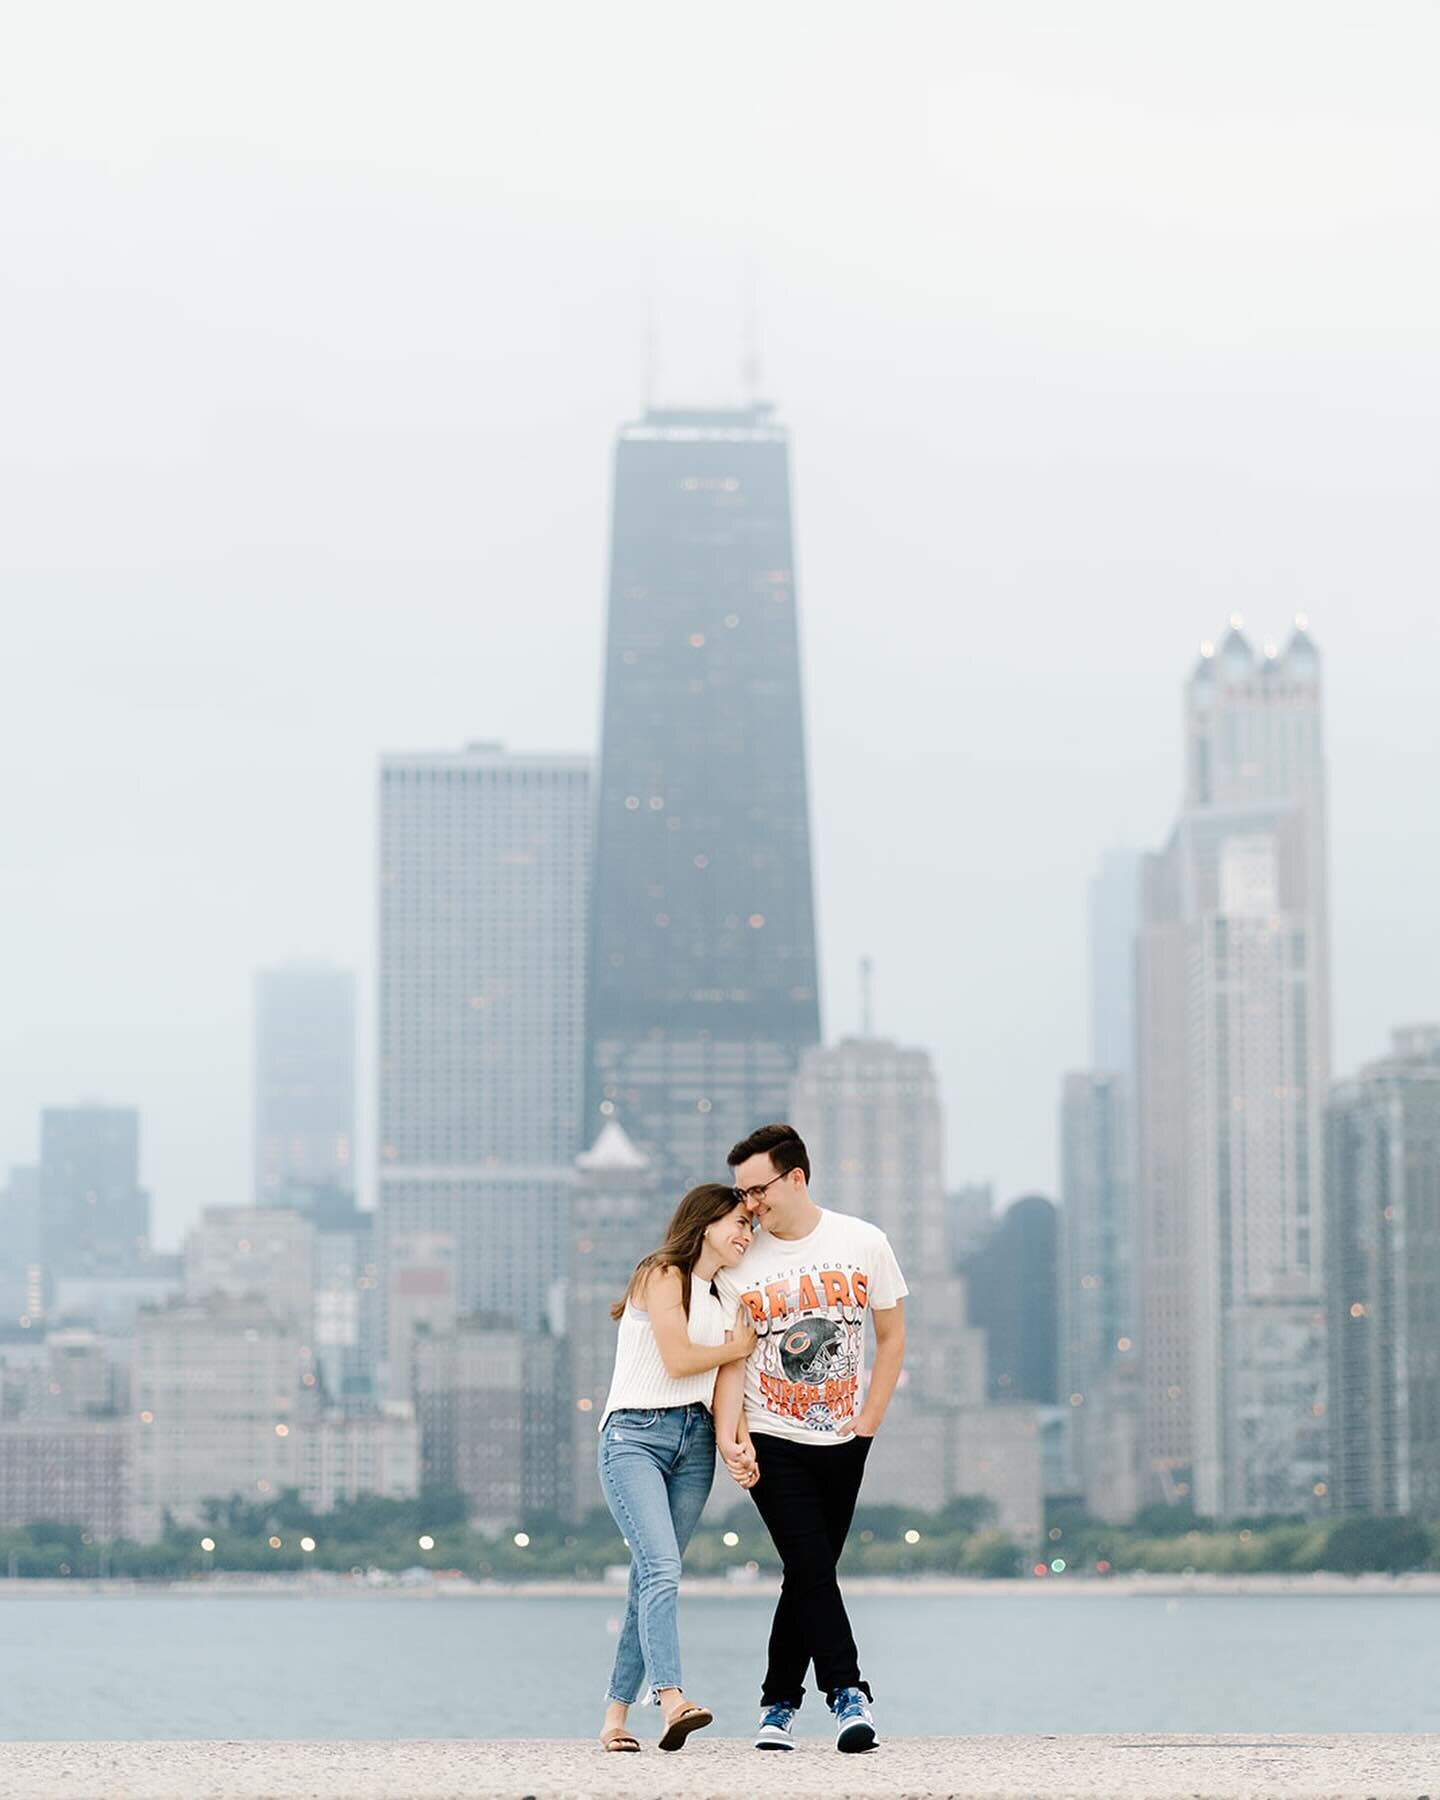 Libby &amp; Mike&rsquo;s hazy, gorgeous engagement session at North Ave 💜
#chicagoweddingphotographer